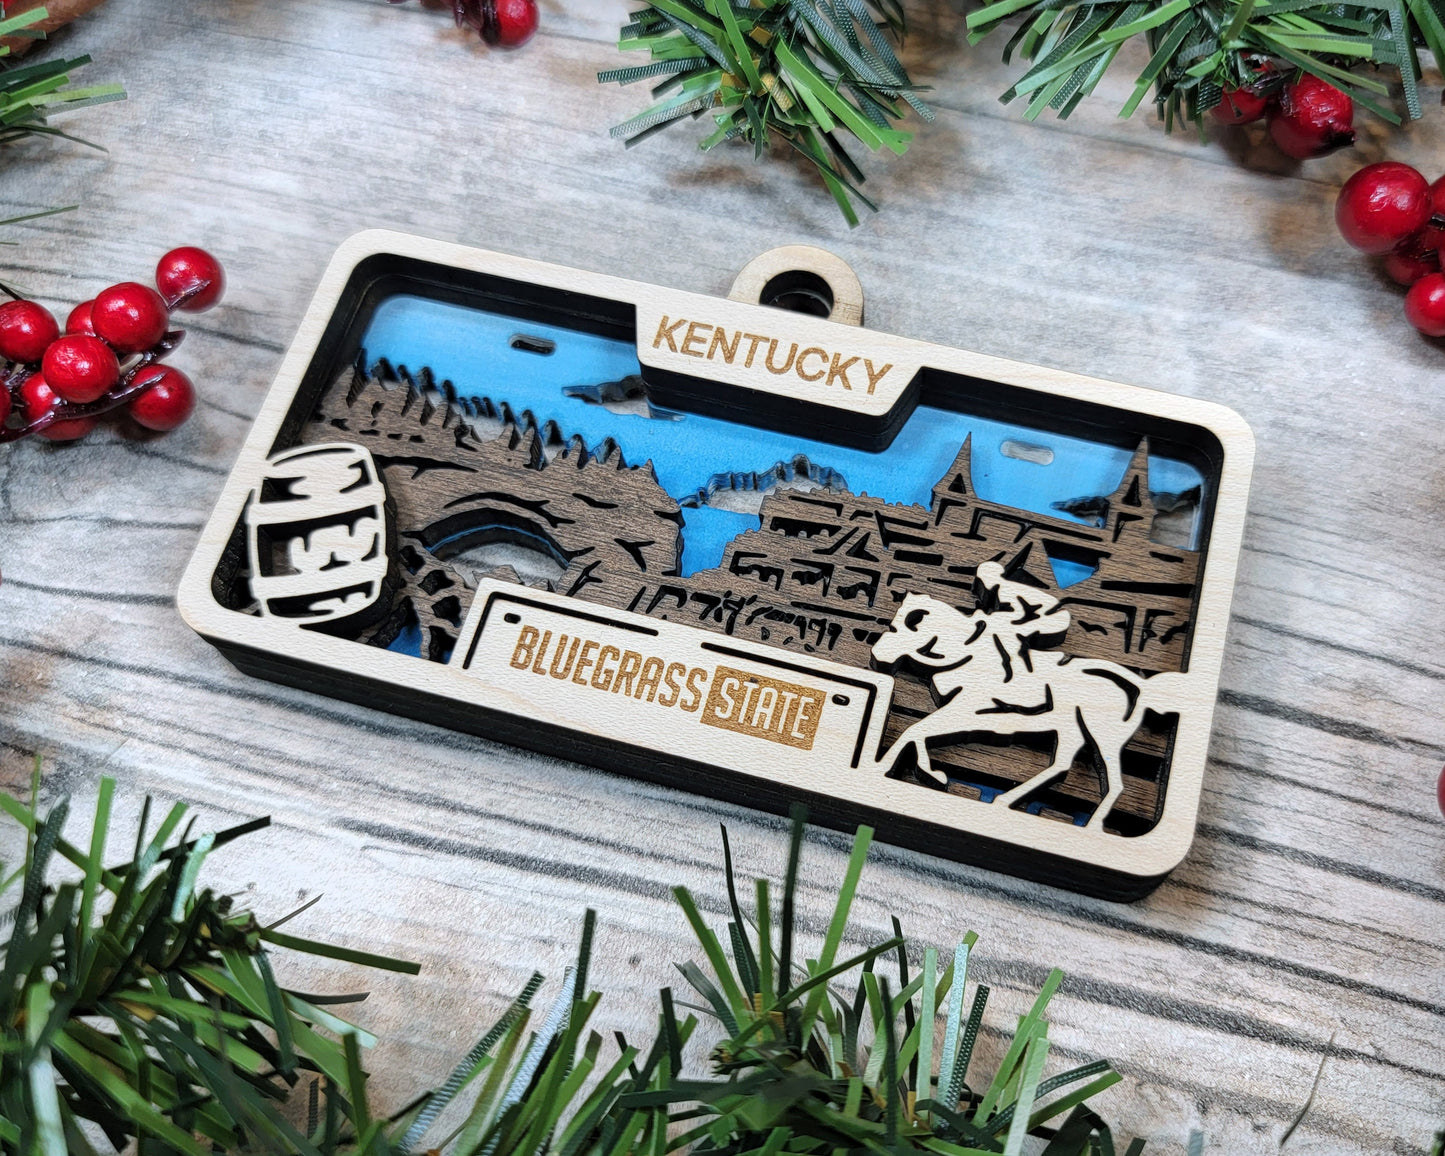 Kentucky State Plate Ornament and Signage - SVG File Download - Sized for Glowforge - Laser Ready Digital Files